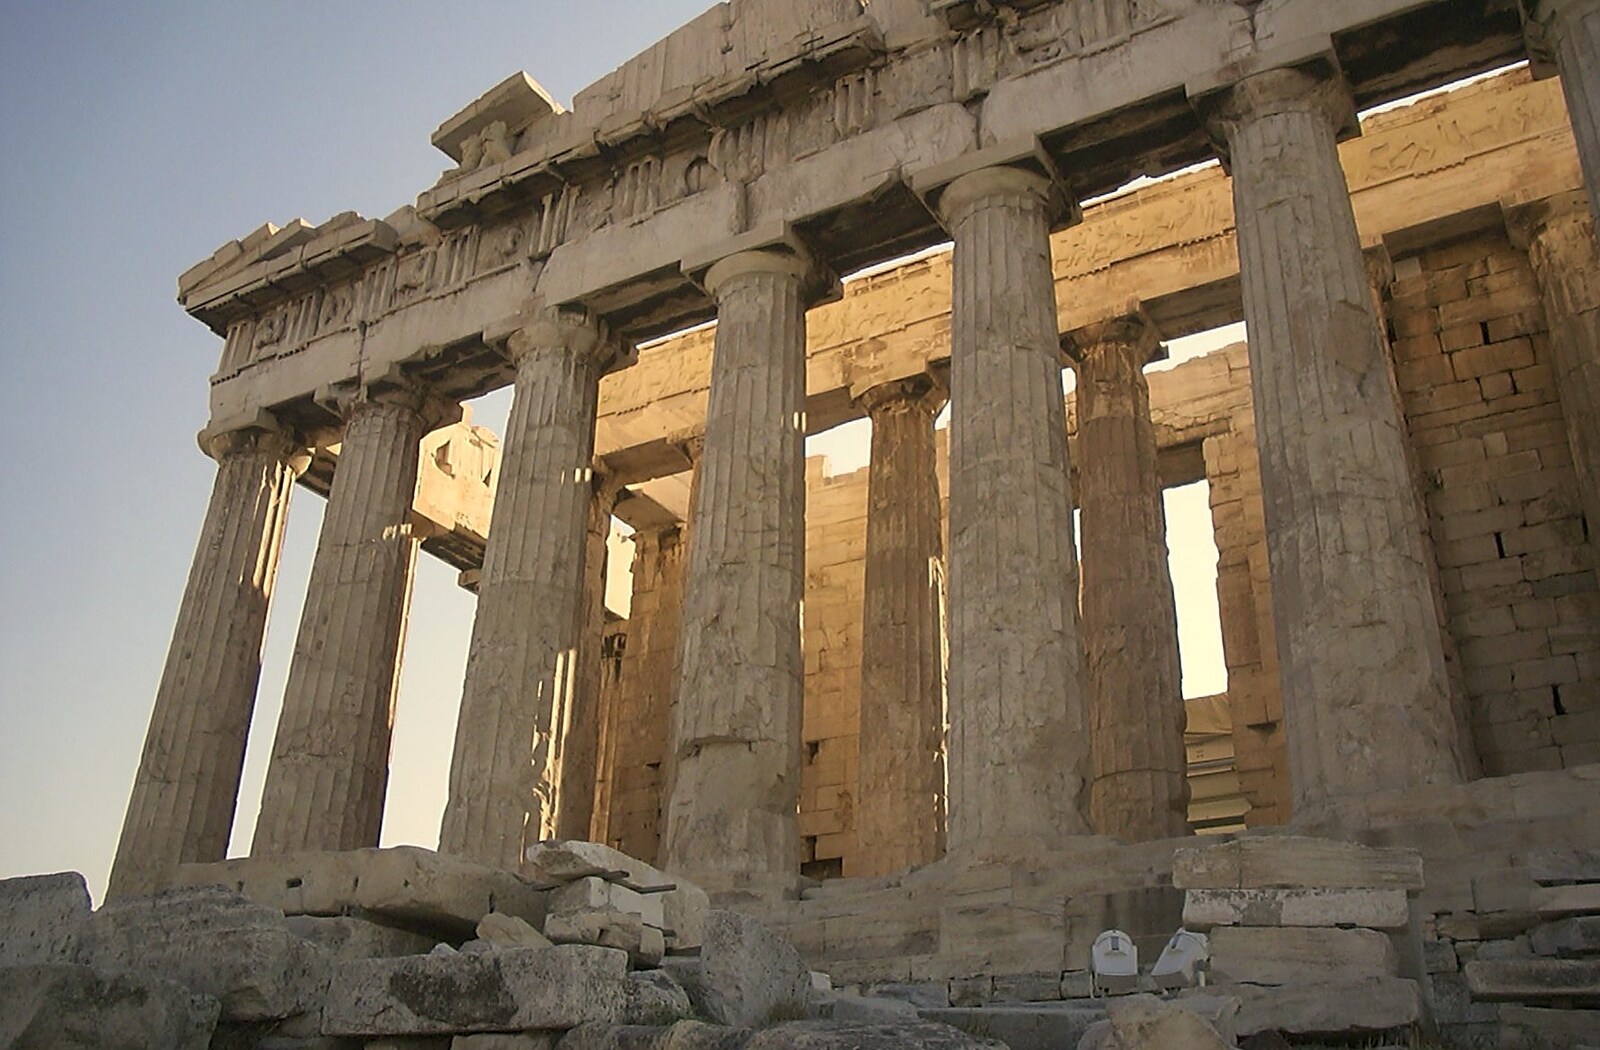 A Postcard From Athens: A Day Trip to the Olympics, Greece - 19th August 2004: The back of the Parthenon